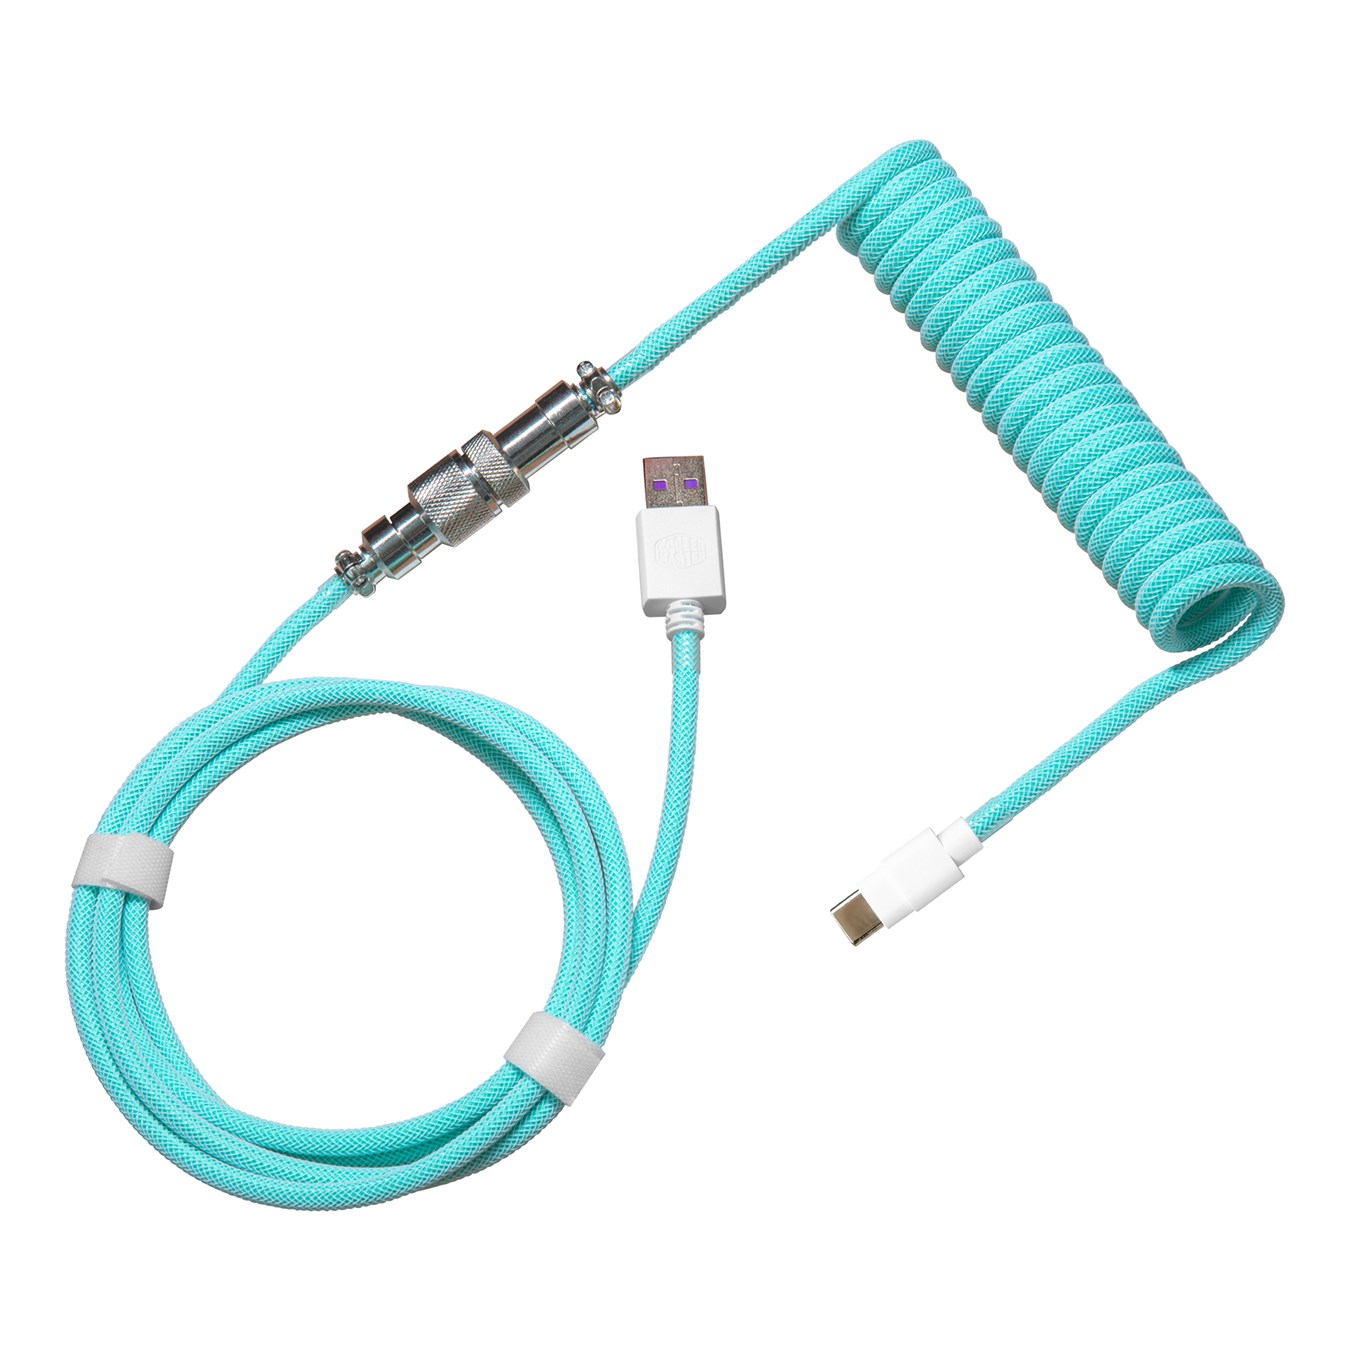 Coiled Keyboard Cable - Cyan - USB Type-A to USB Type-C connector